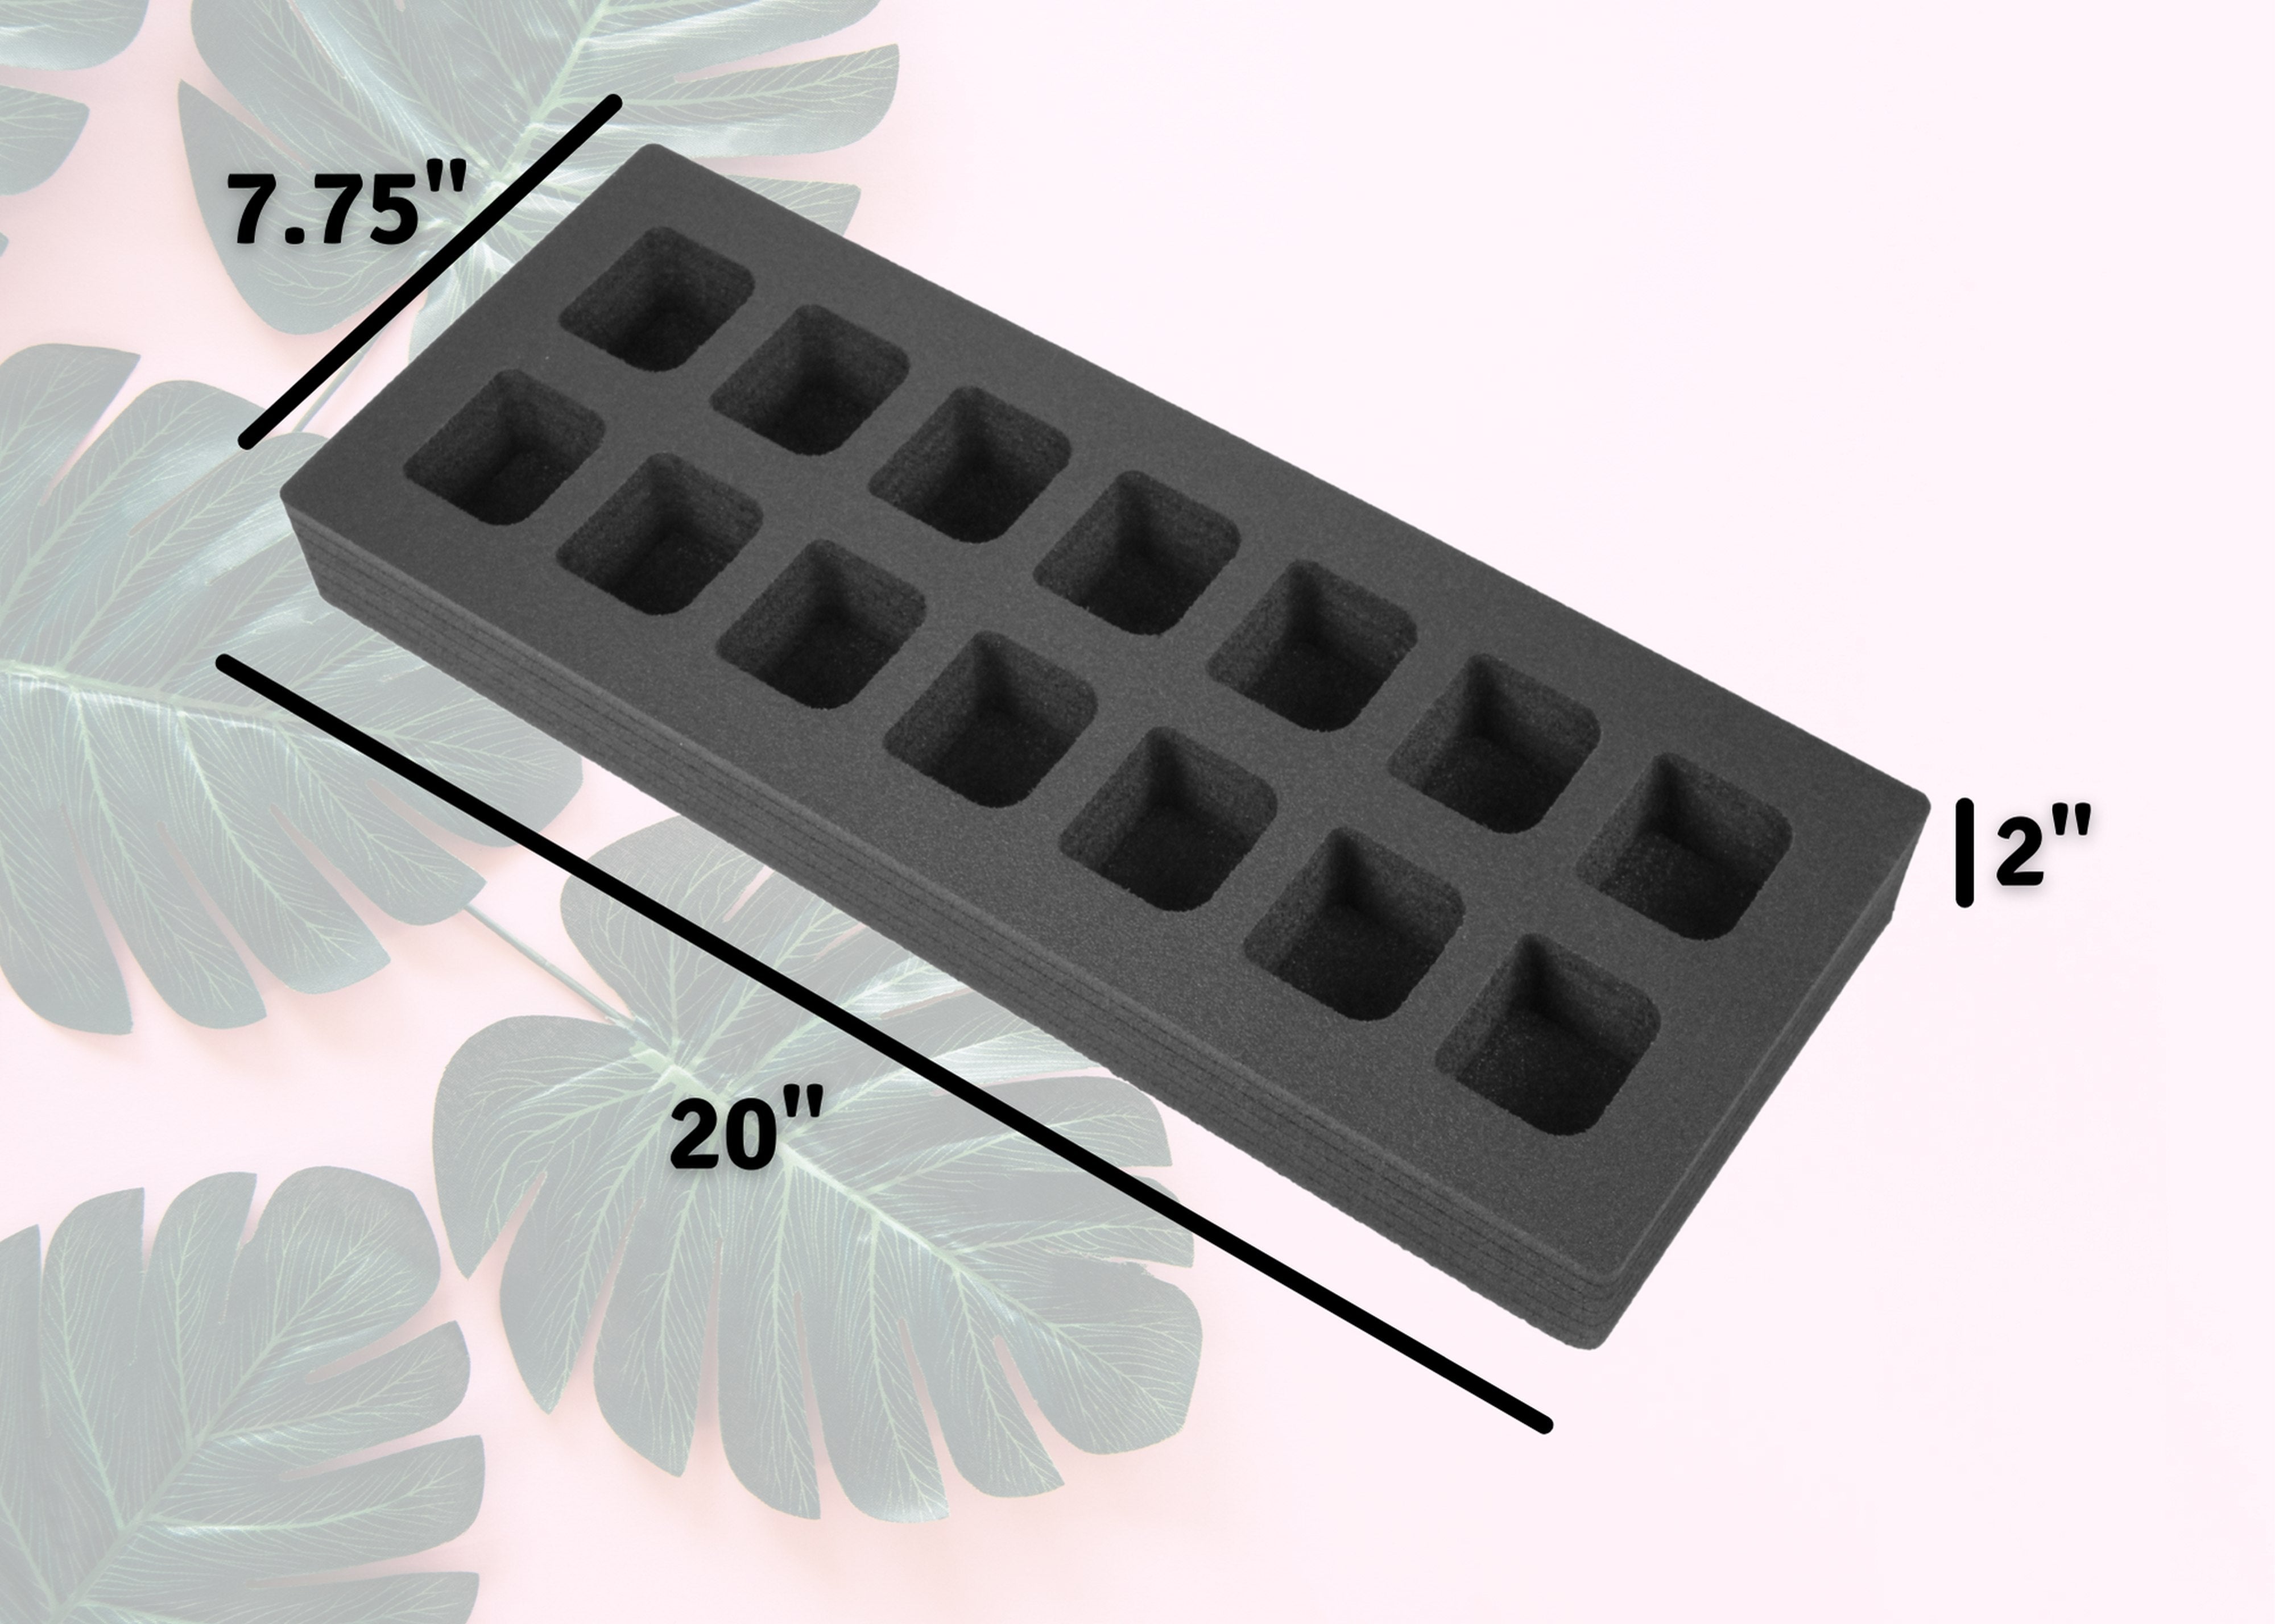 Cocktail Capsule Drawer Tray Insert Compatible Keurig DrinkWorks Pods for Kitchen Home Bar Party Waterproof Foam 14 Compartment 7.75 x 20 Inches